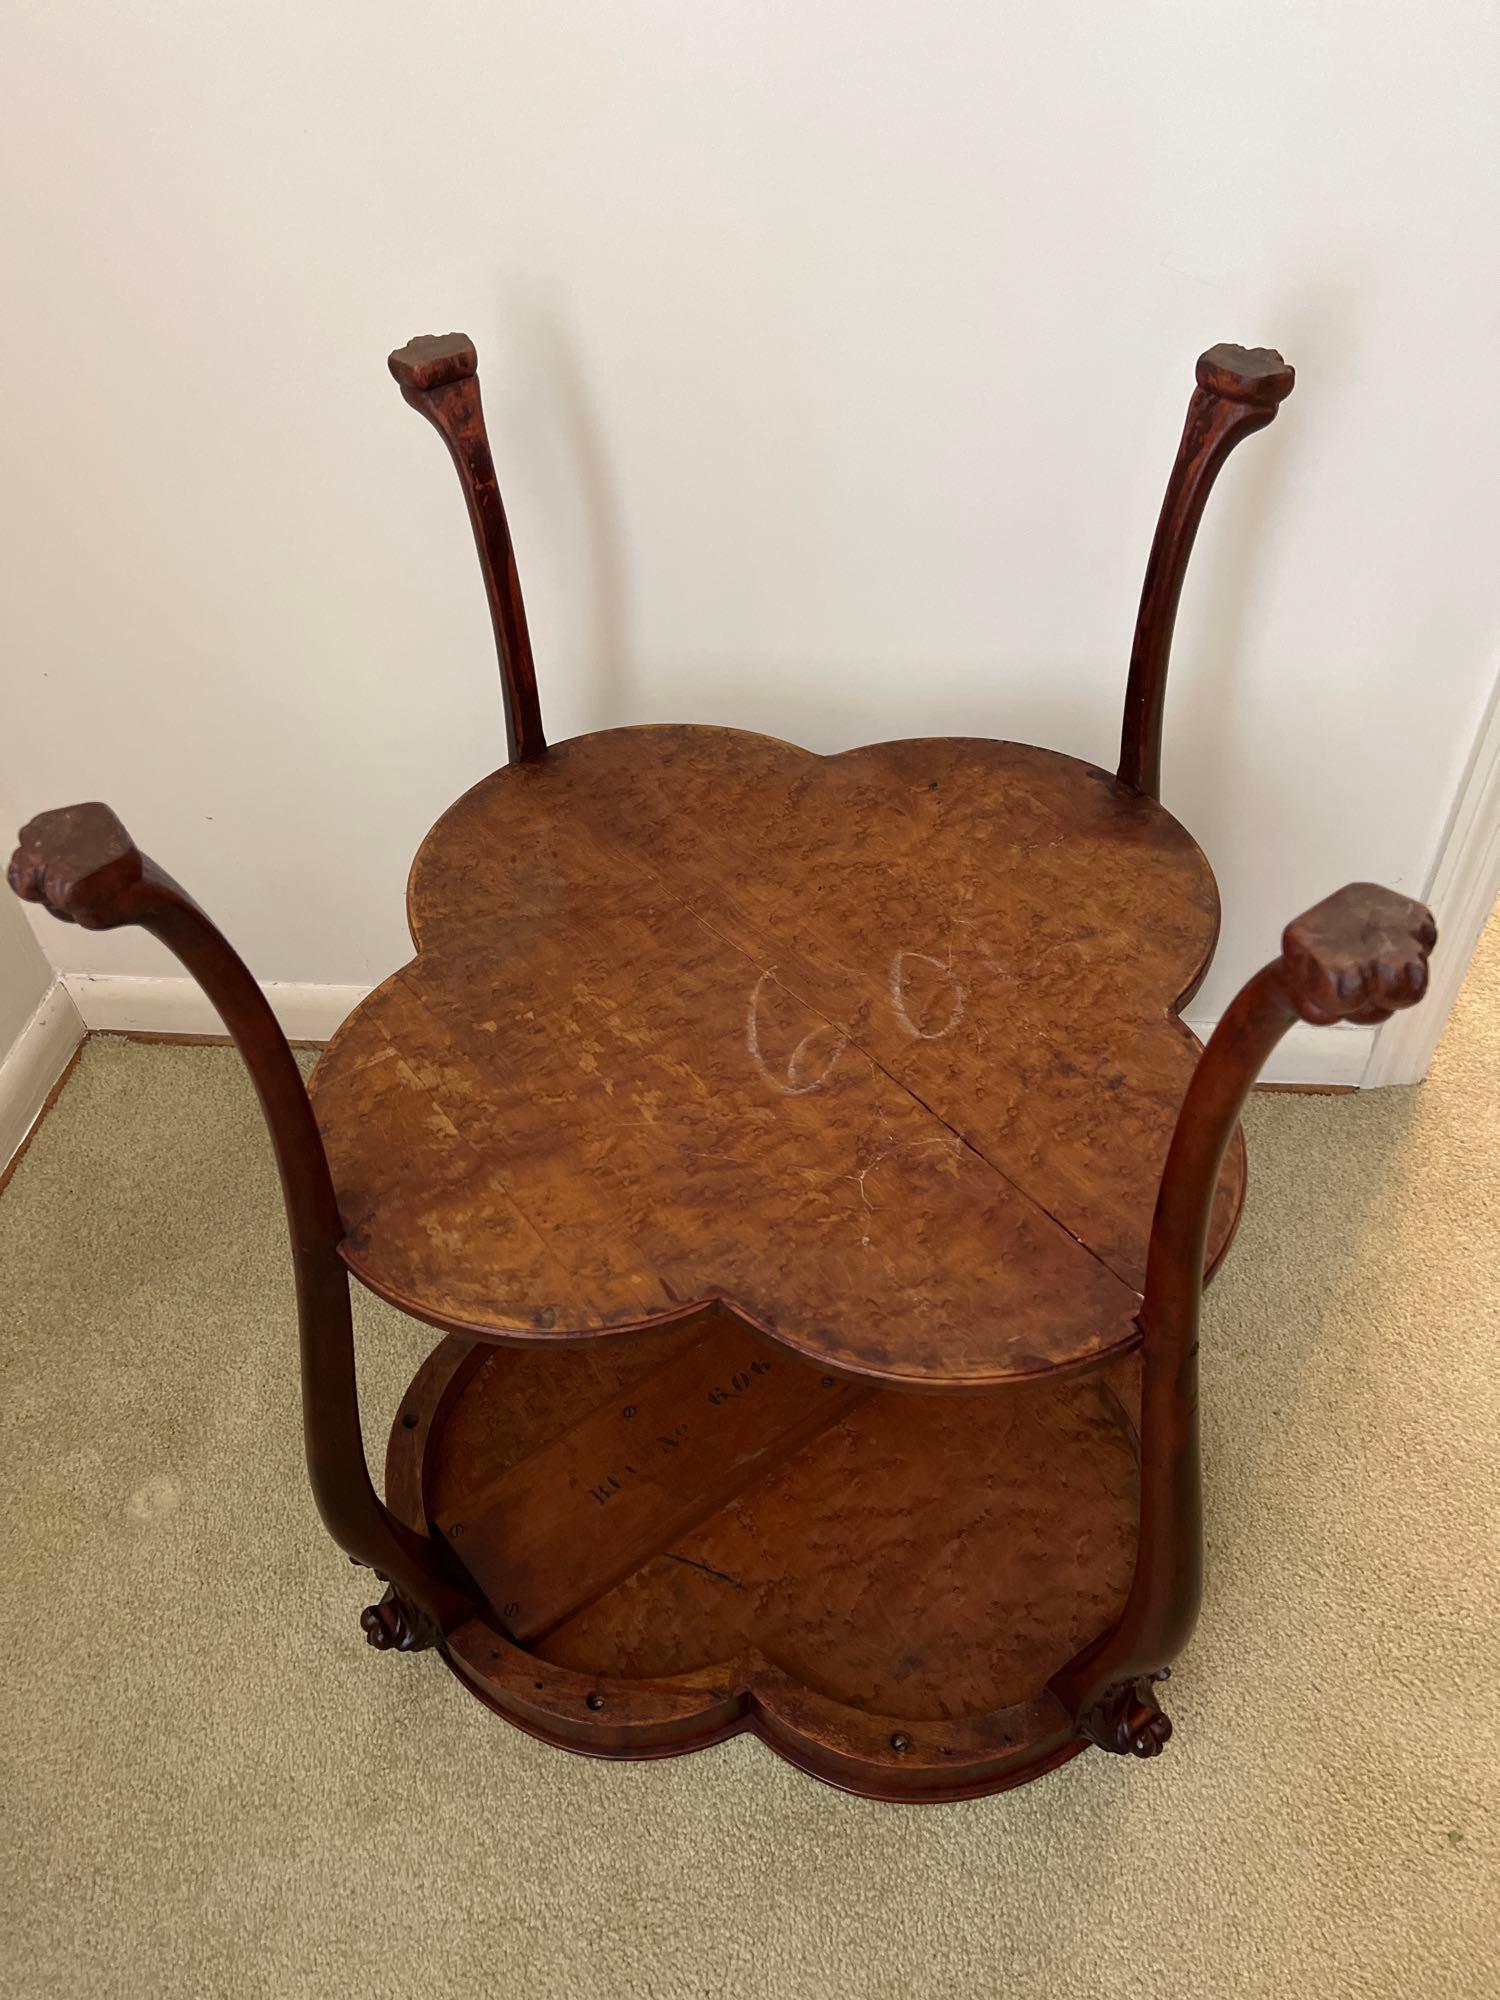 Antique Chippendale Style Mahogany Tea Table